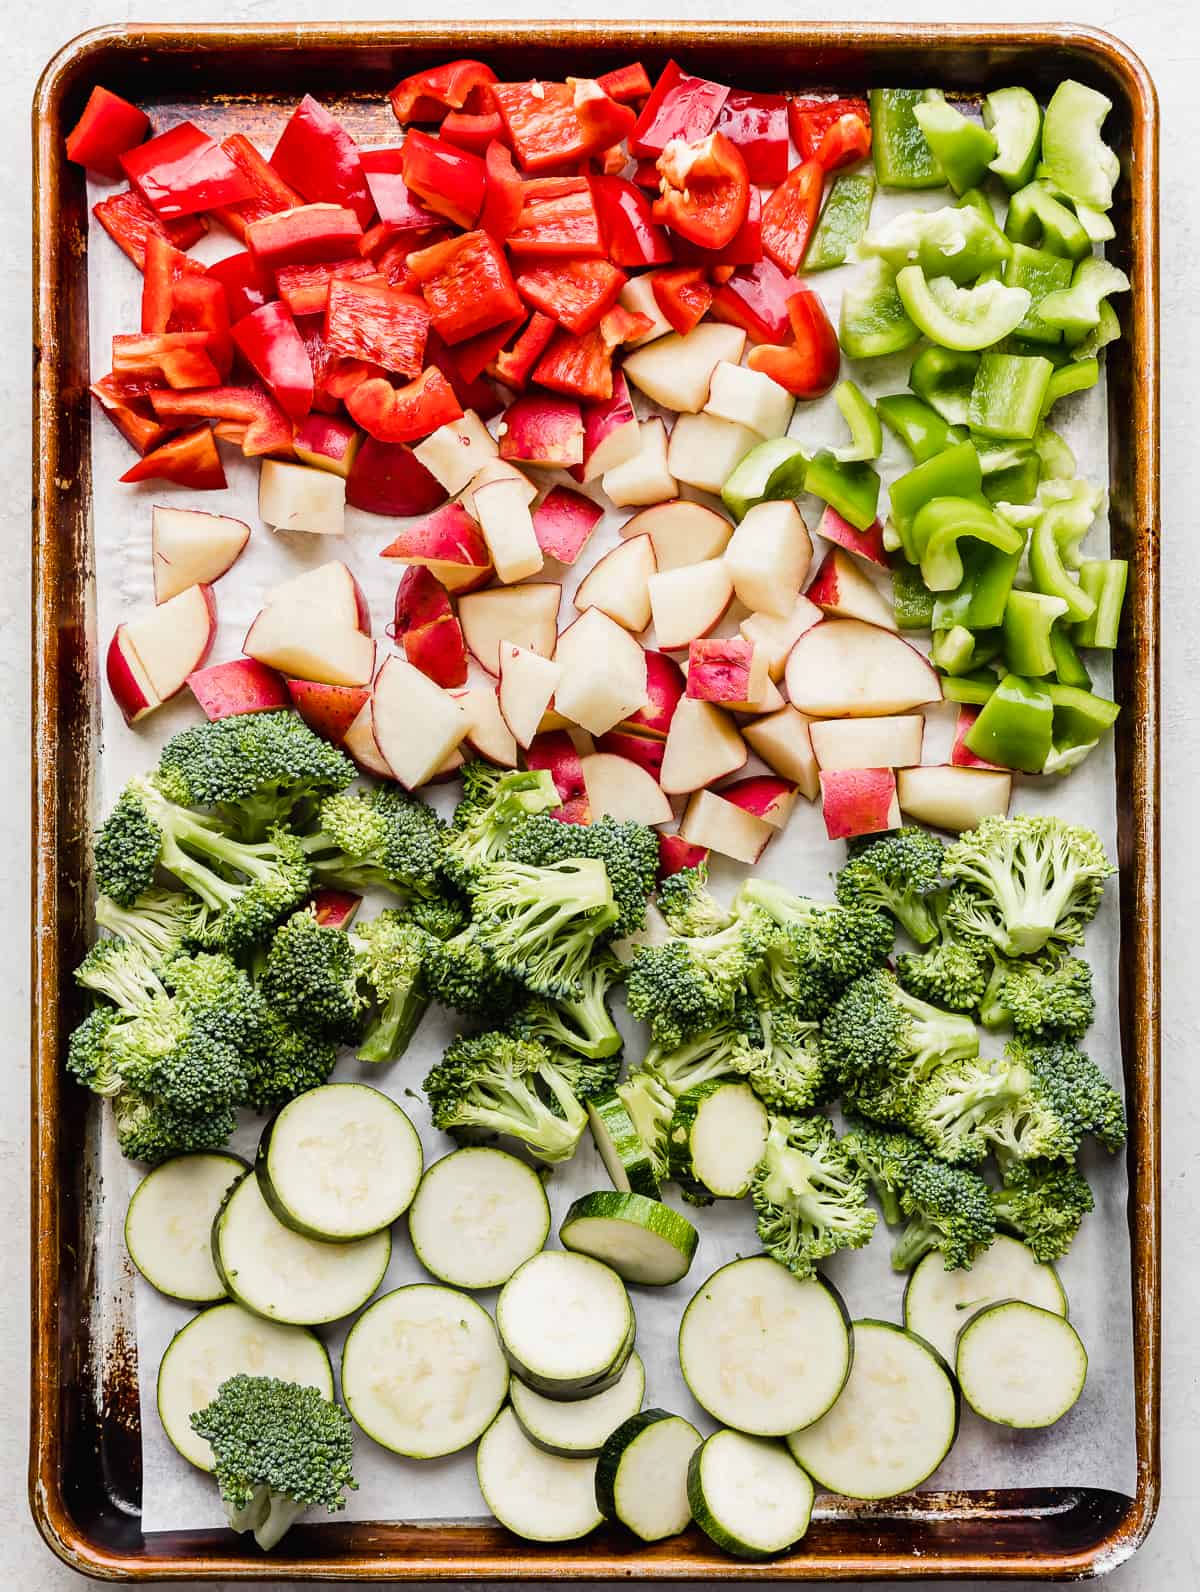 A baking sheet with red and green peppers, cut potatoes, broccoli florets and coin zucchini slices.